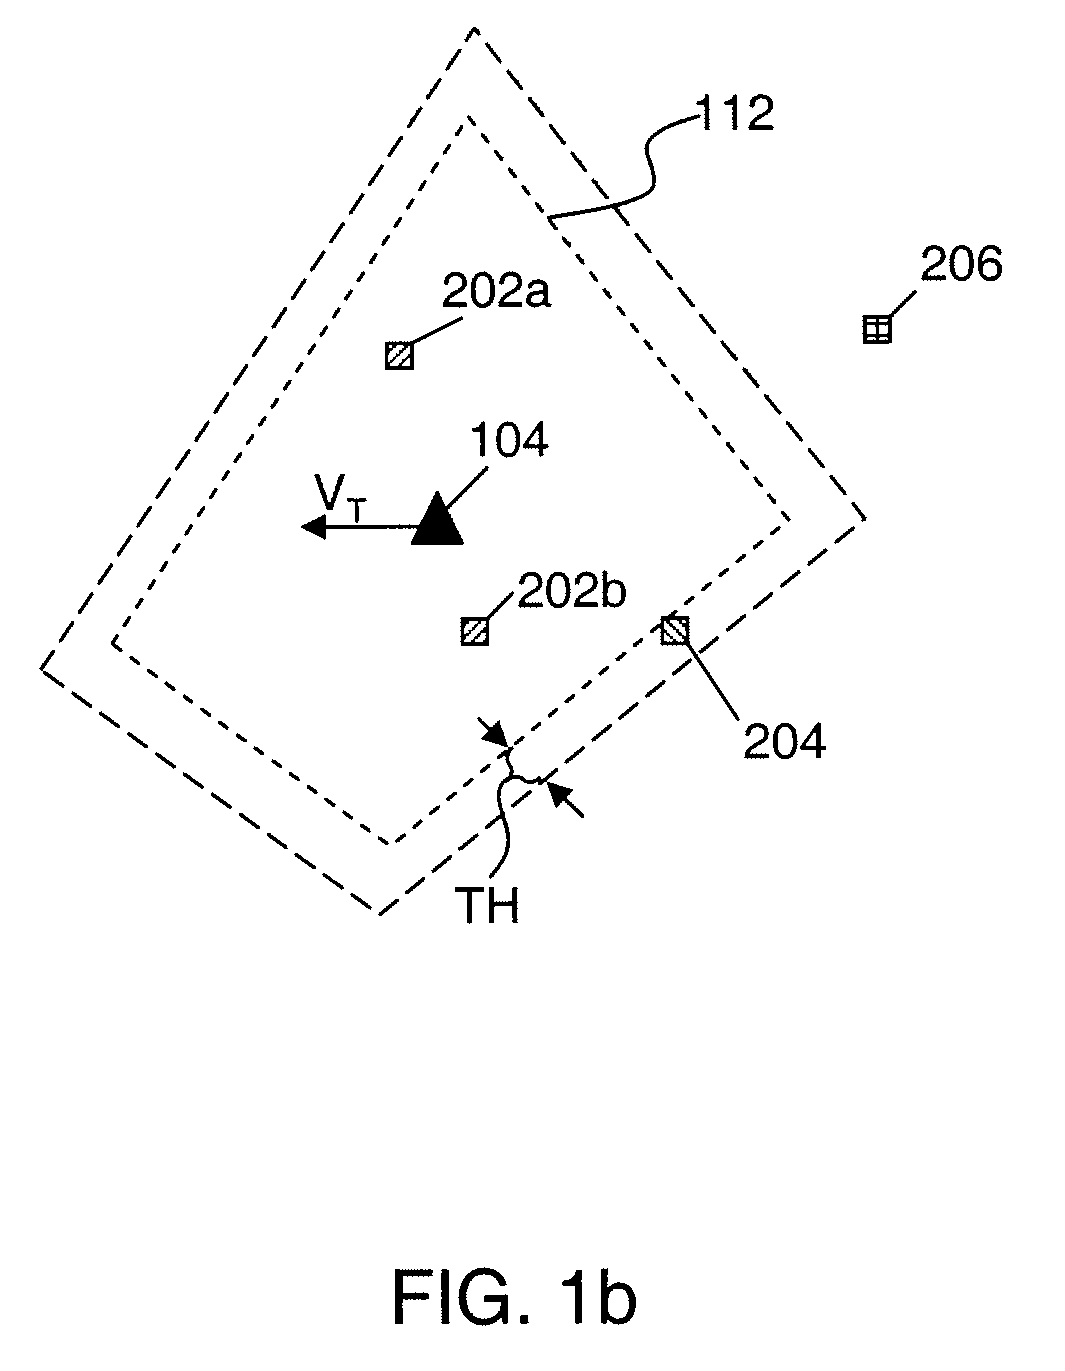 System and method for precision geolocation utilizing multiple sensing modalities